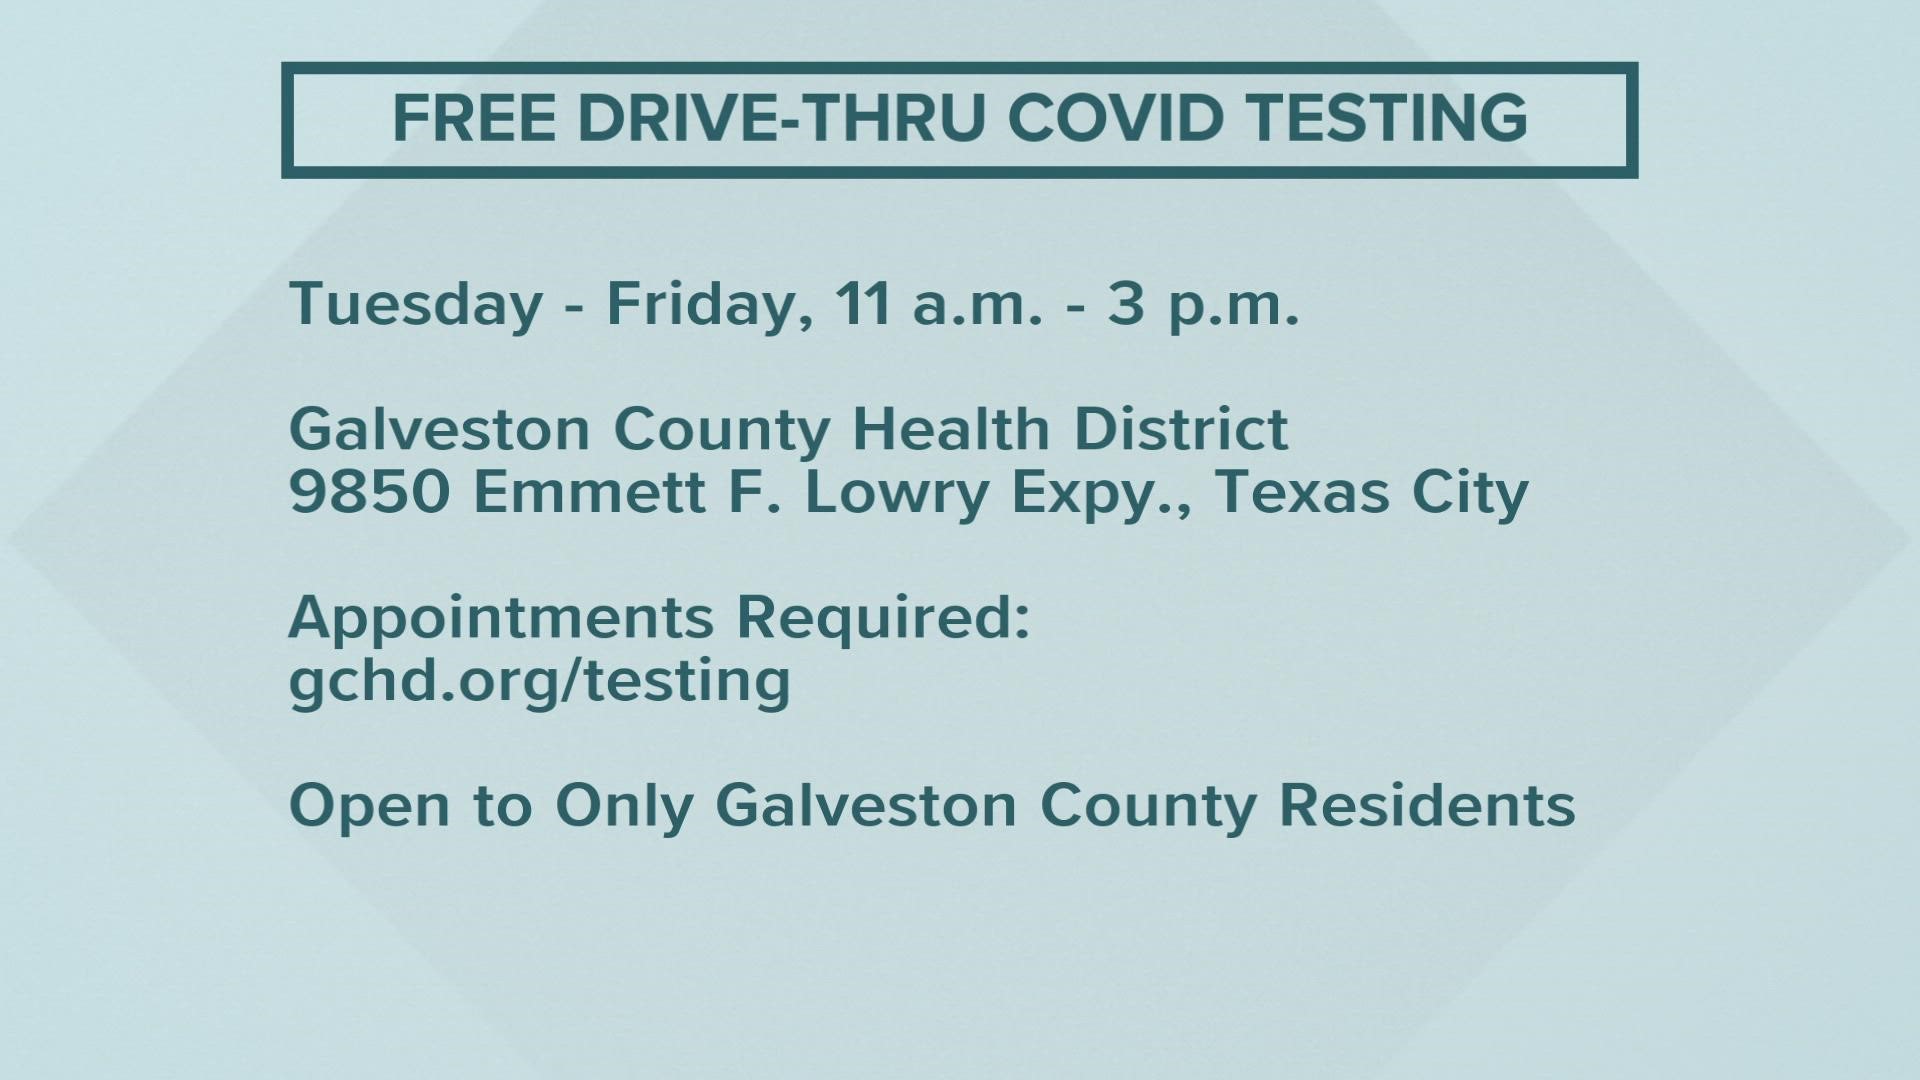 The Galveston County Health Department is opening a free drive-thru COVID testing site this week for its residents.